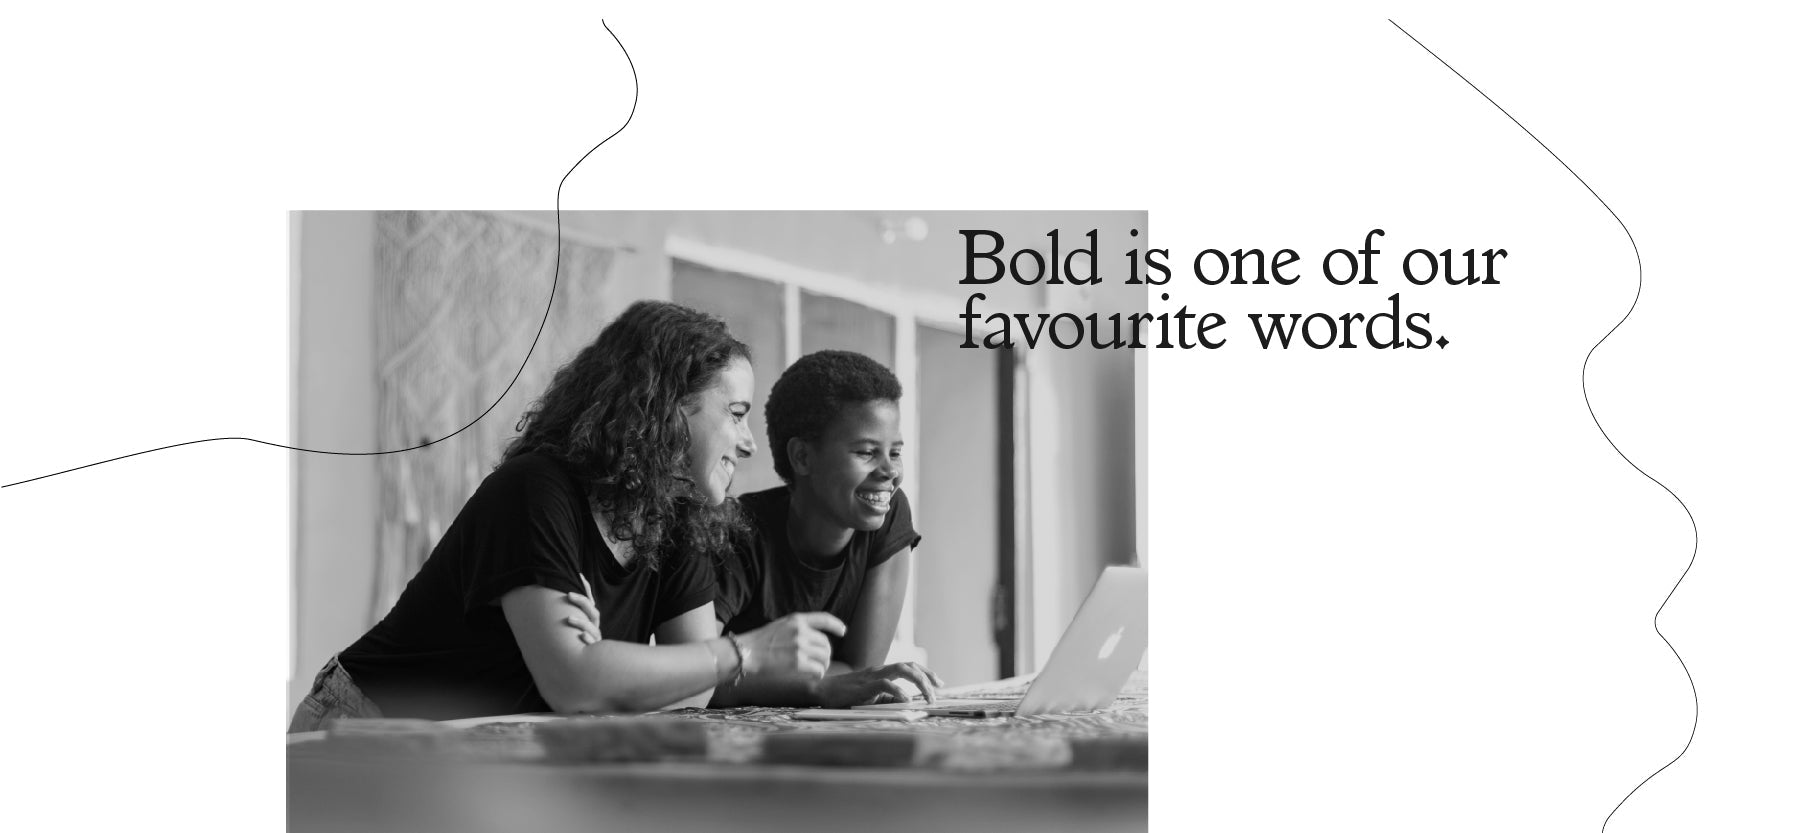 Bold is one of our favourite words